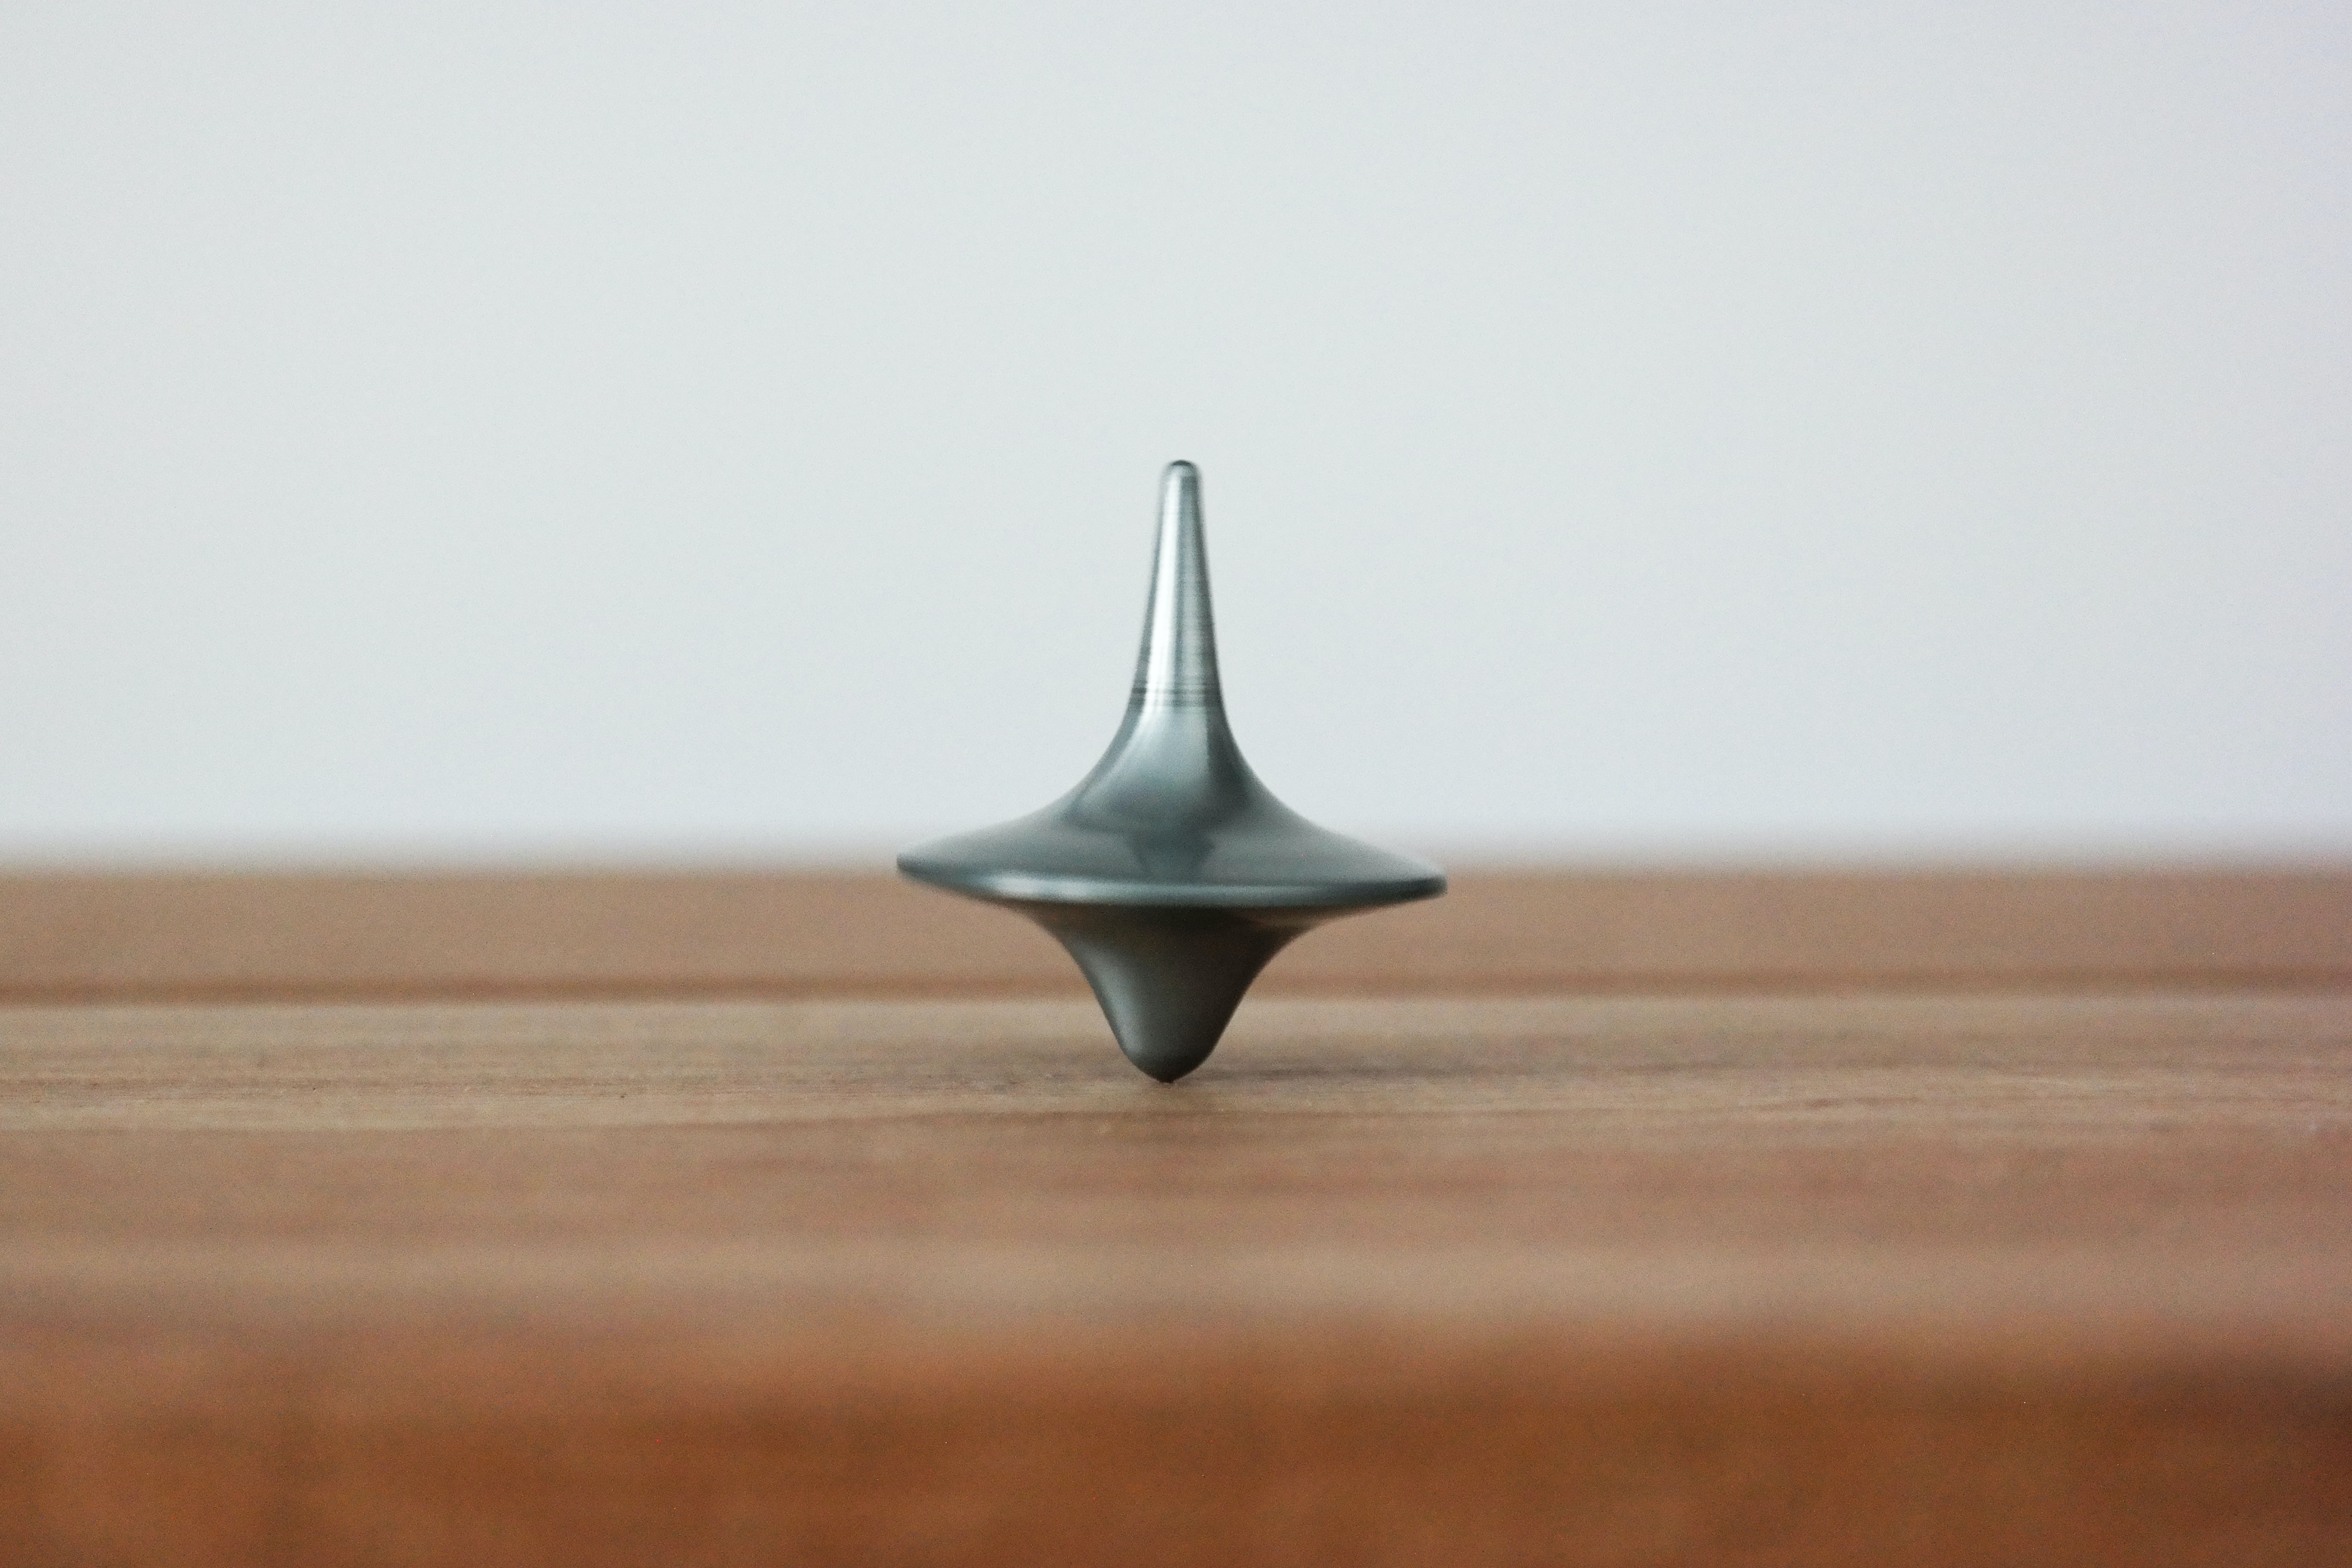 Spiing top to depict balance